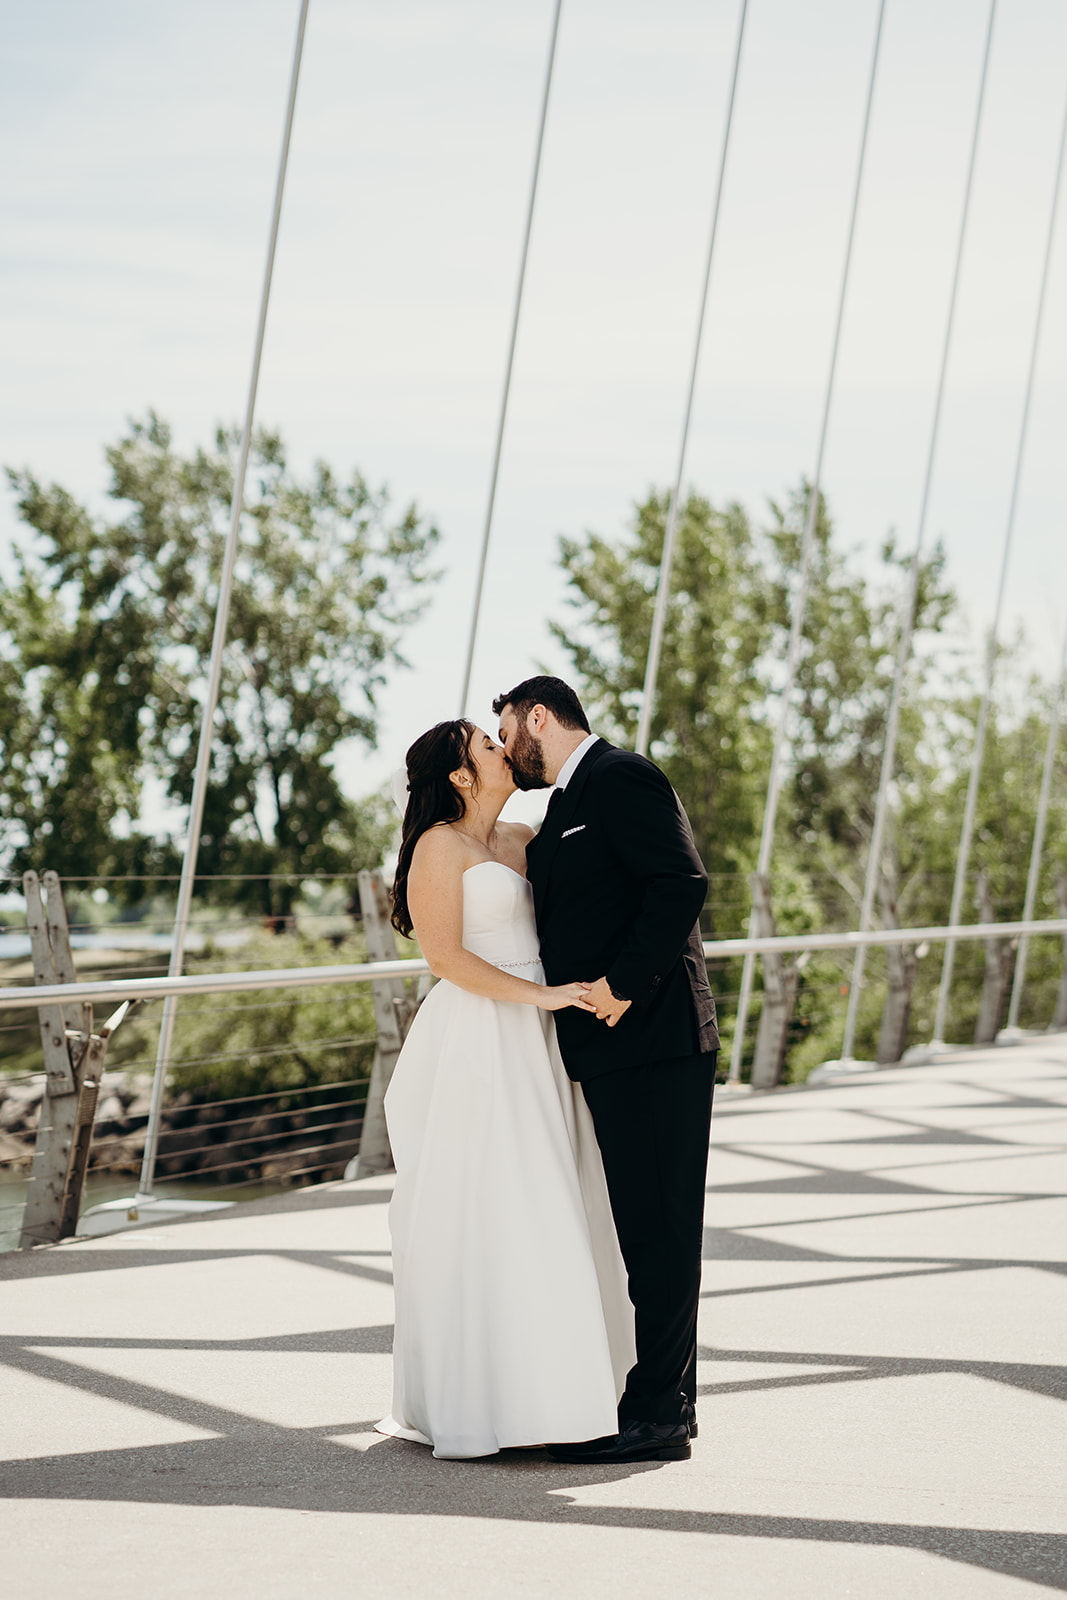 Husband and wife kissing on a bridge with trees in the background.